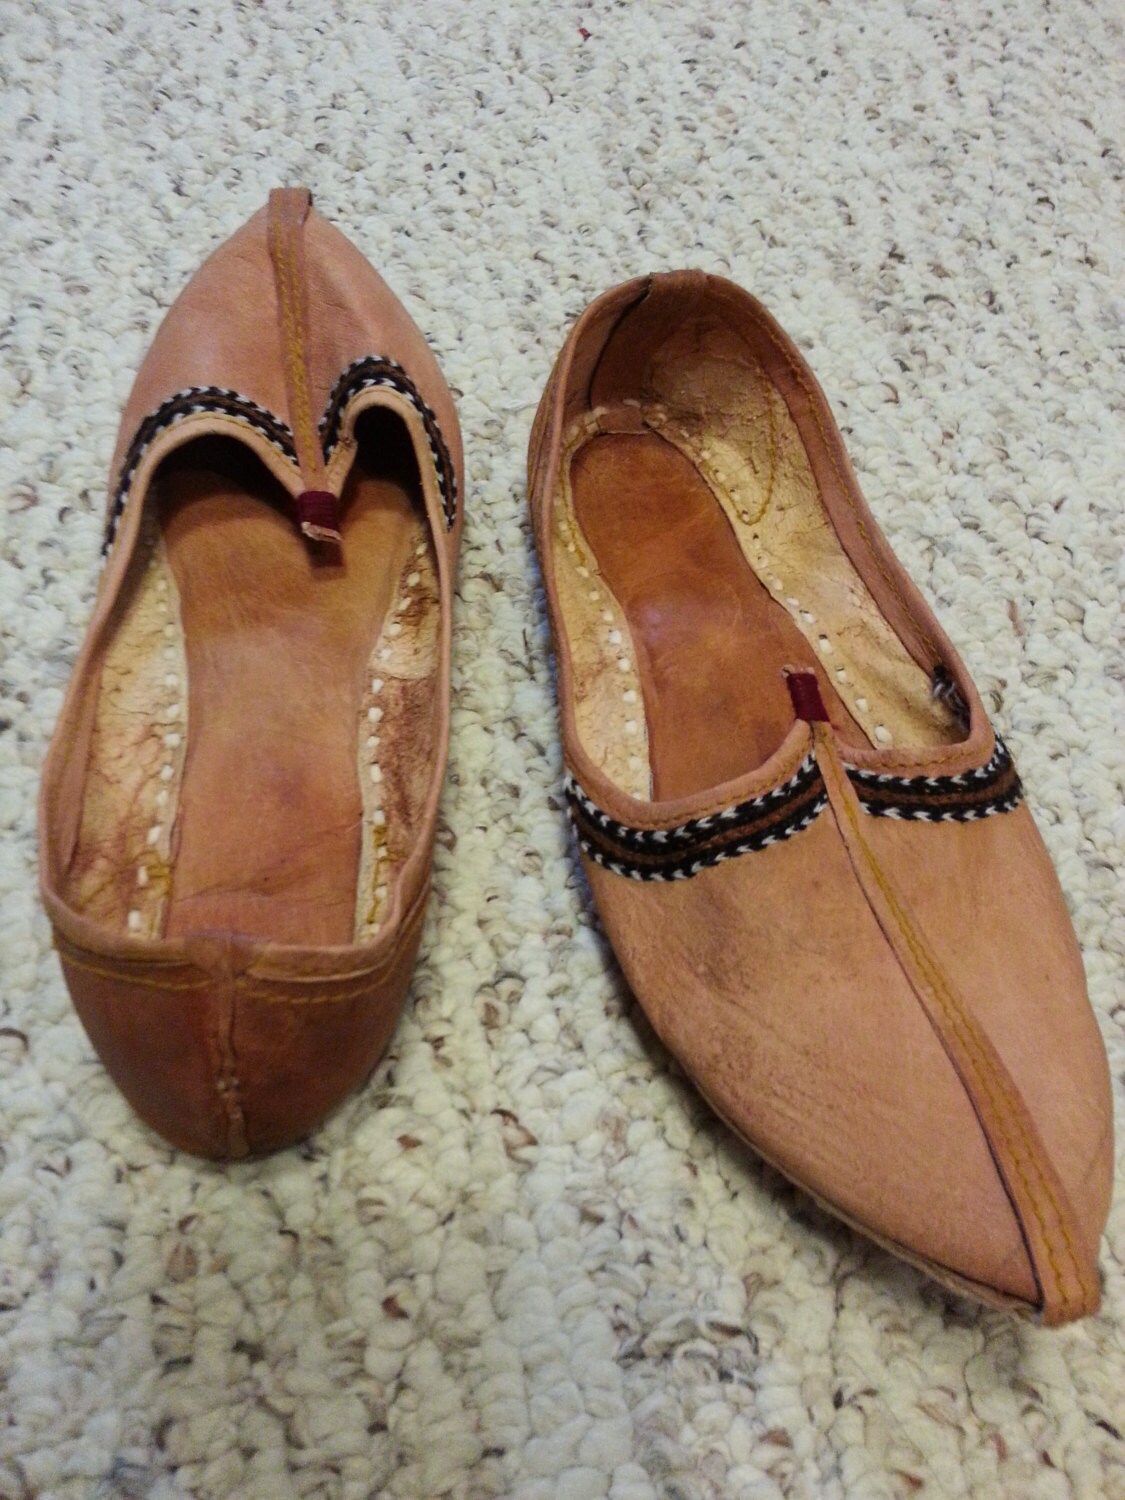 All Brown Leather Indian shoes size 7.5-8 EUR 37-38